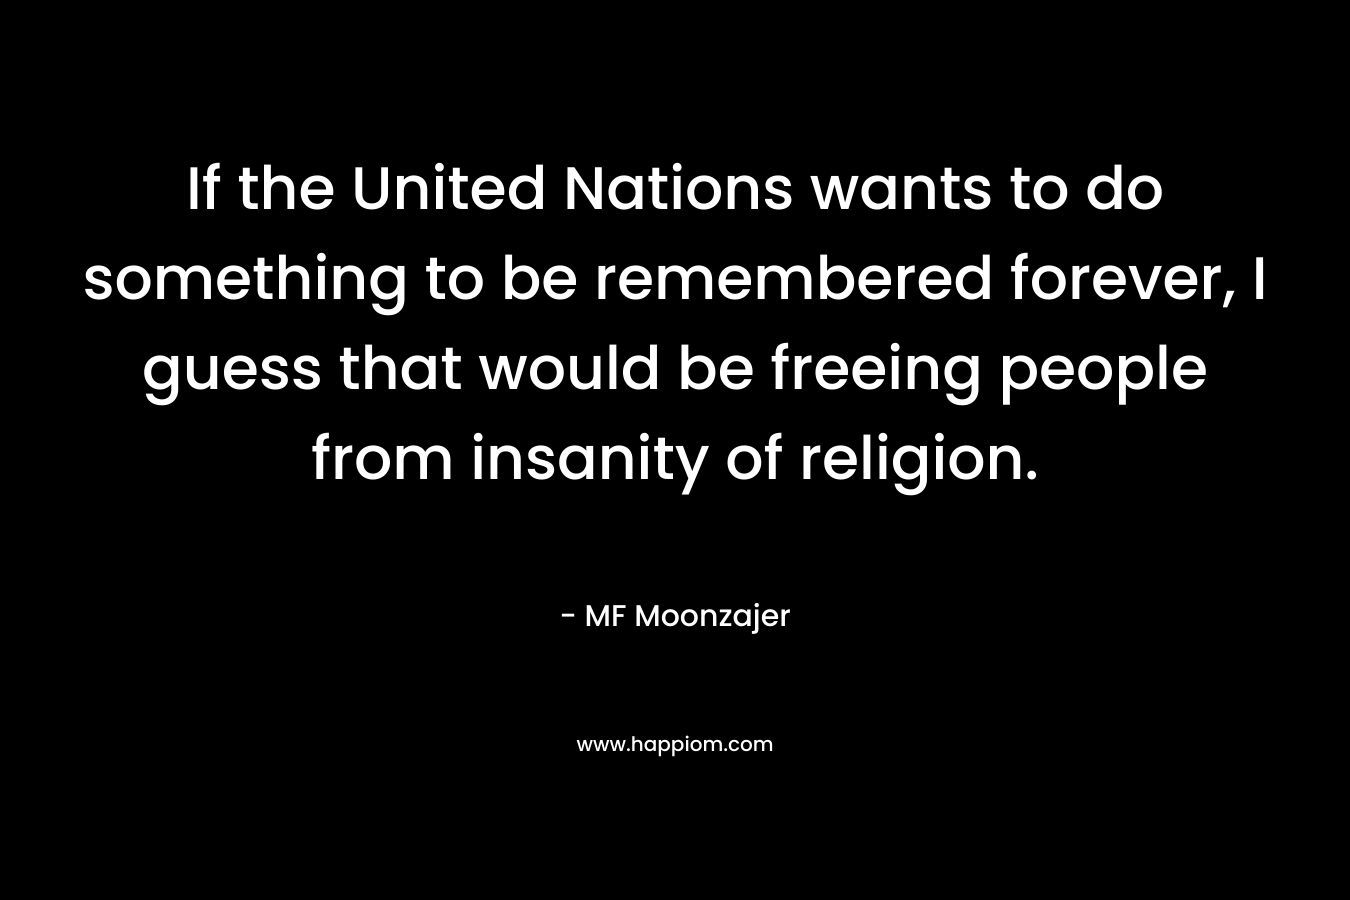 If the United Nations wants to do something to be remembered forever, I guess that would be freeing people from insanity of religion.